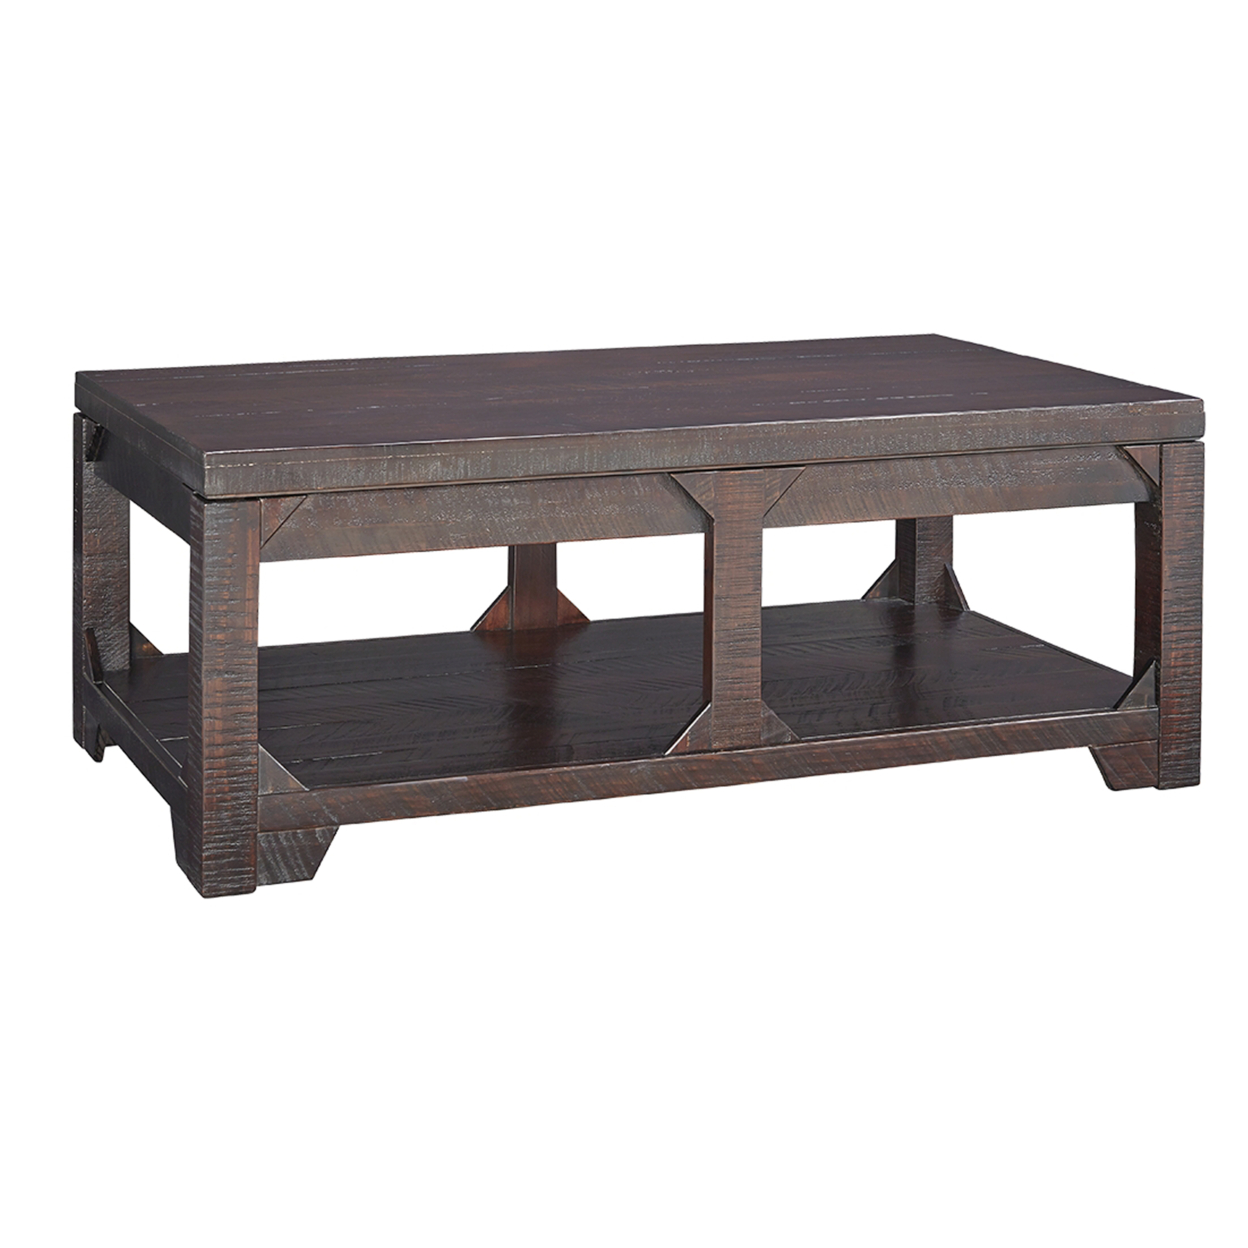 Wooden Lift Top Coffee Table With One Open Shelf, Brown- Saltoro Sherpi